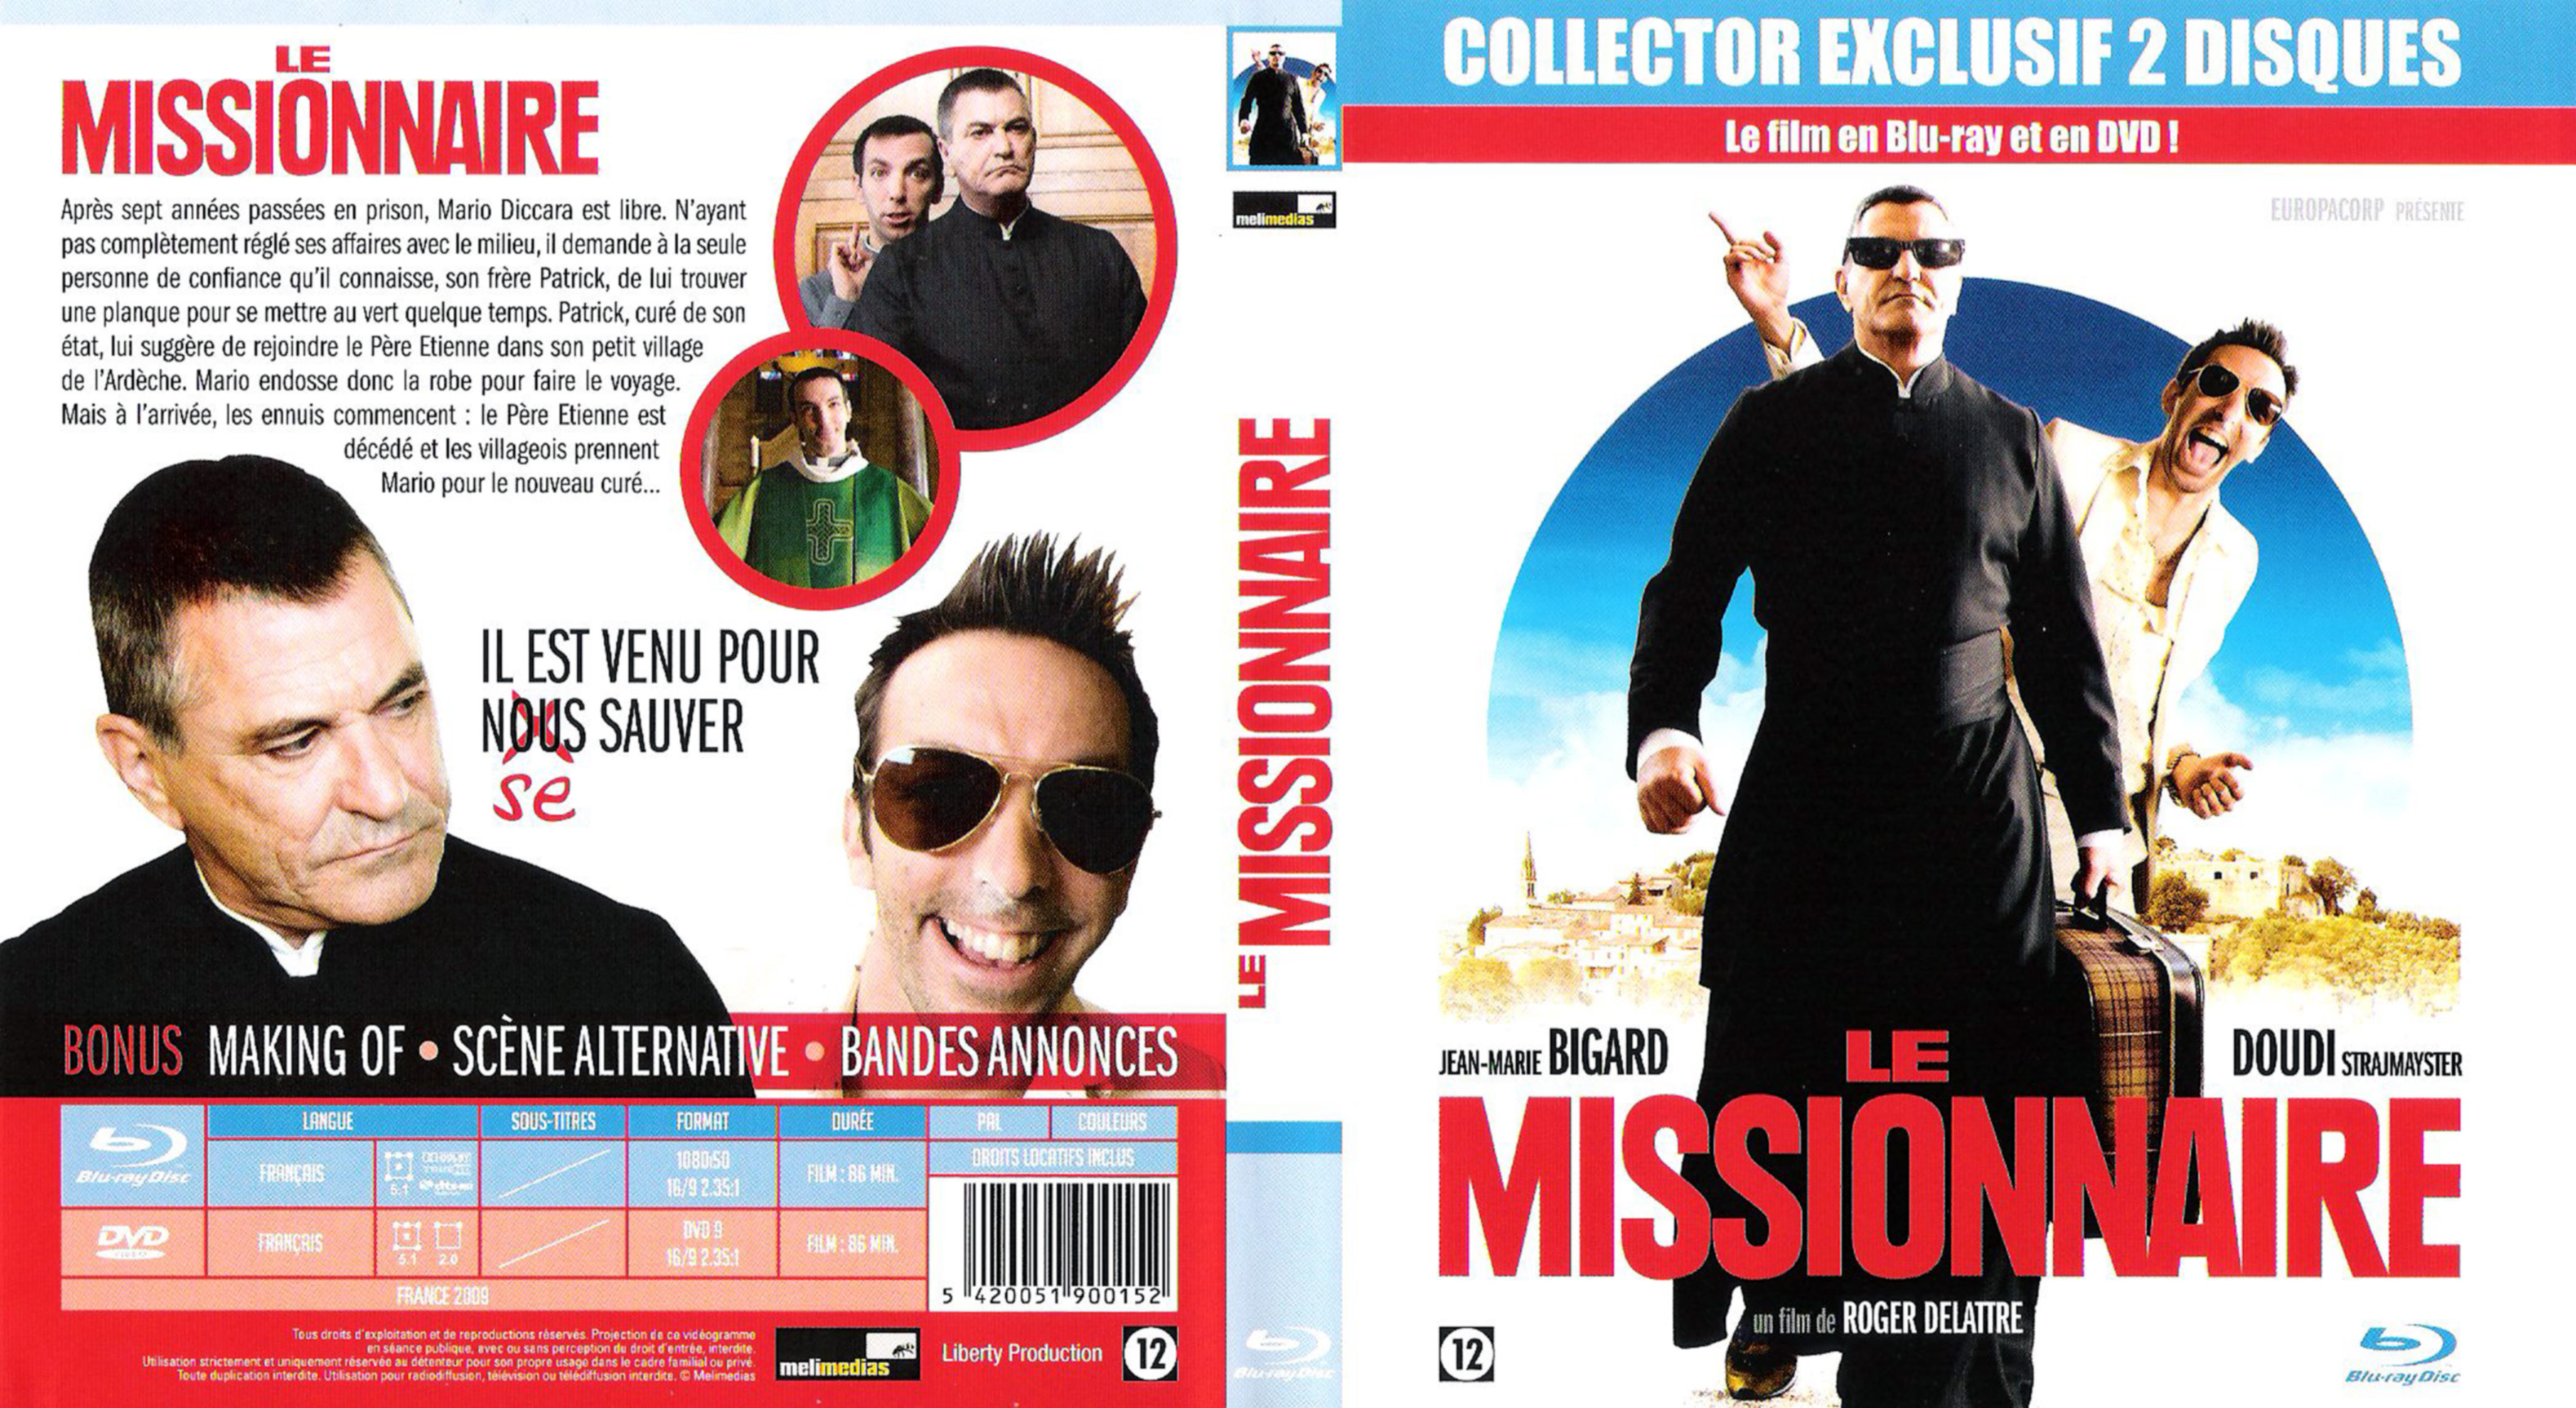 Jaquette DVD Le missionnaire (BLU-RAY)